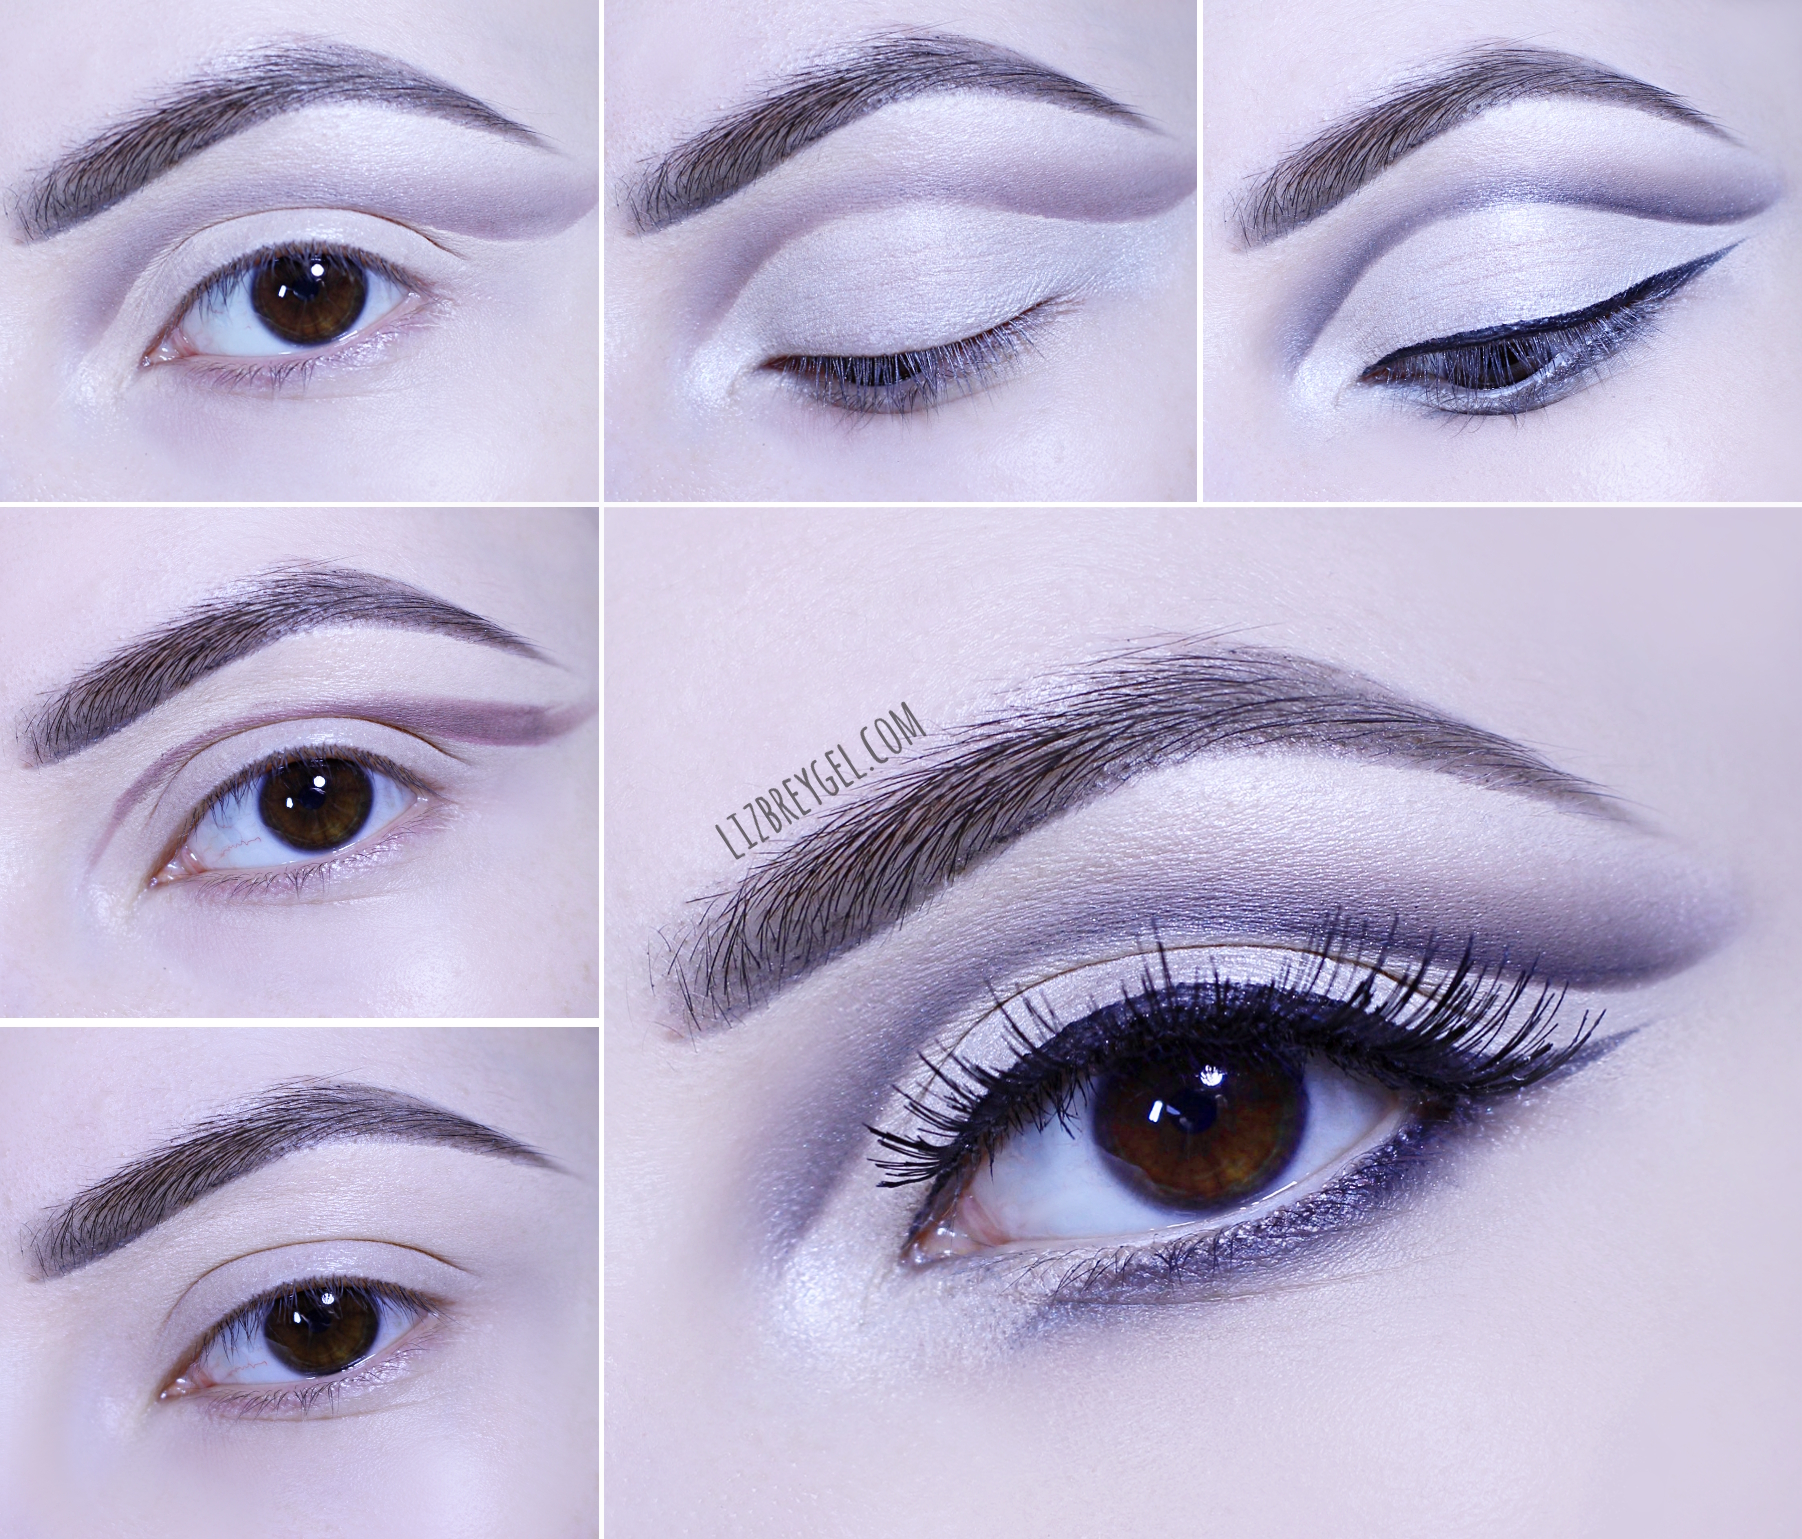 makeup pictorial on how to do an industrial eye makeup look